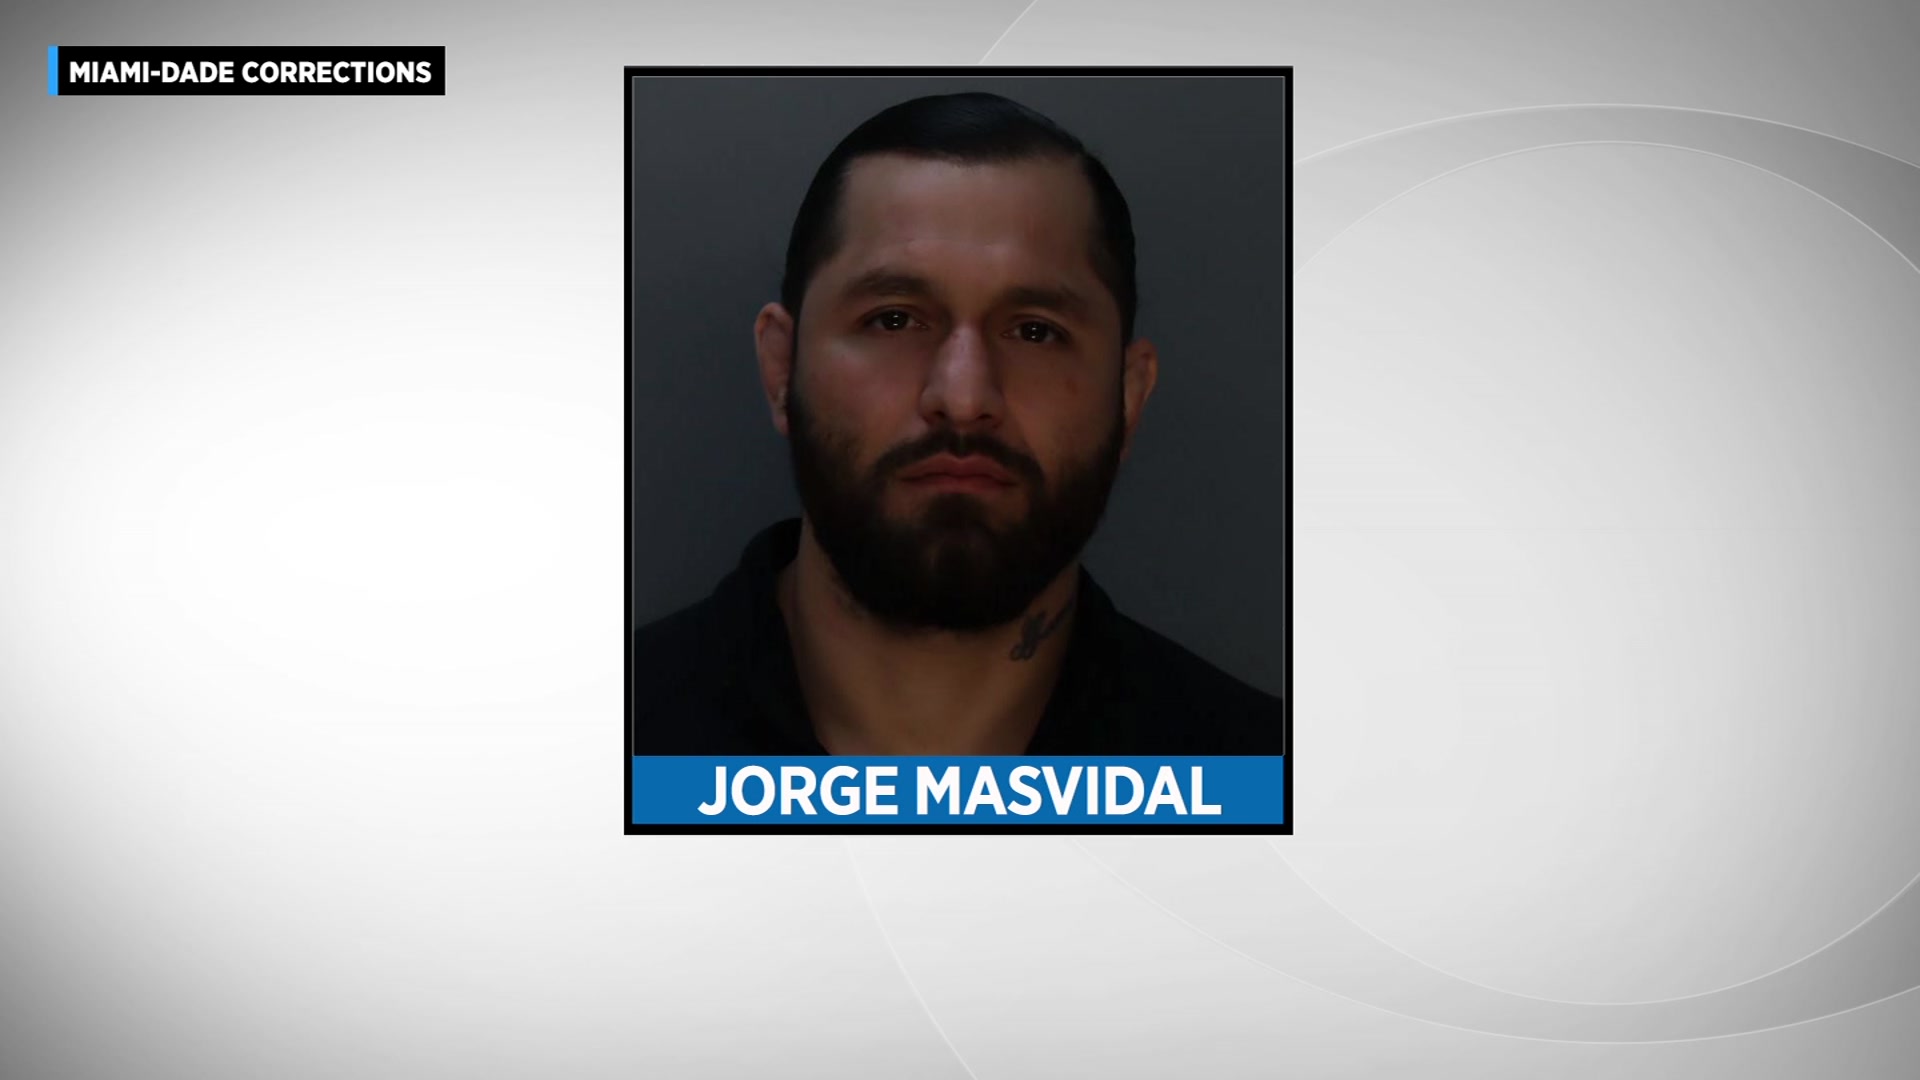 UFC Fighter Jorge Masvidal Booked Into Jail After Dust-Up With Colby Covington